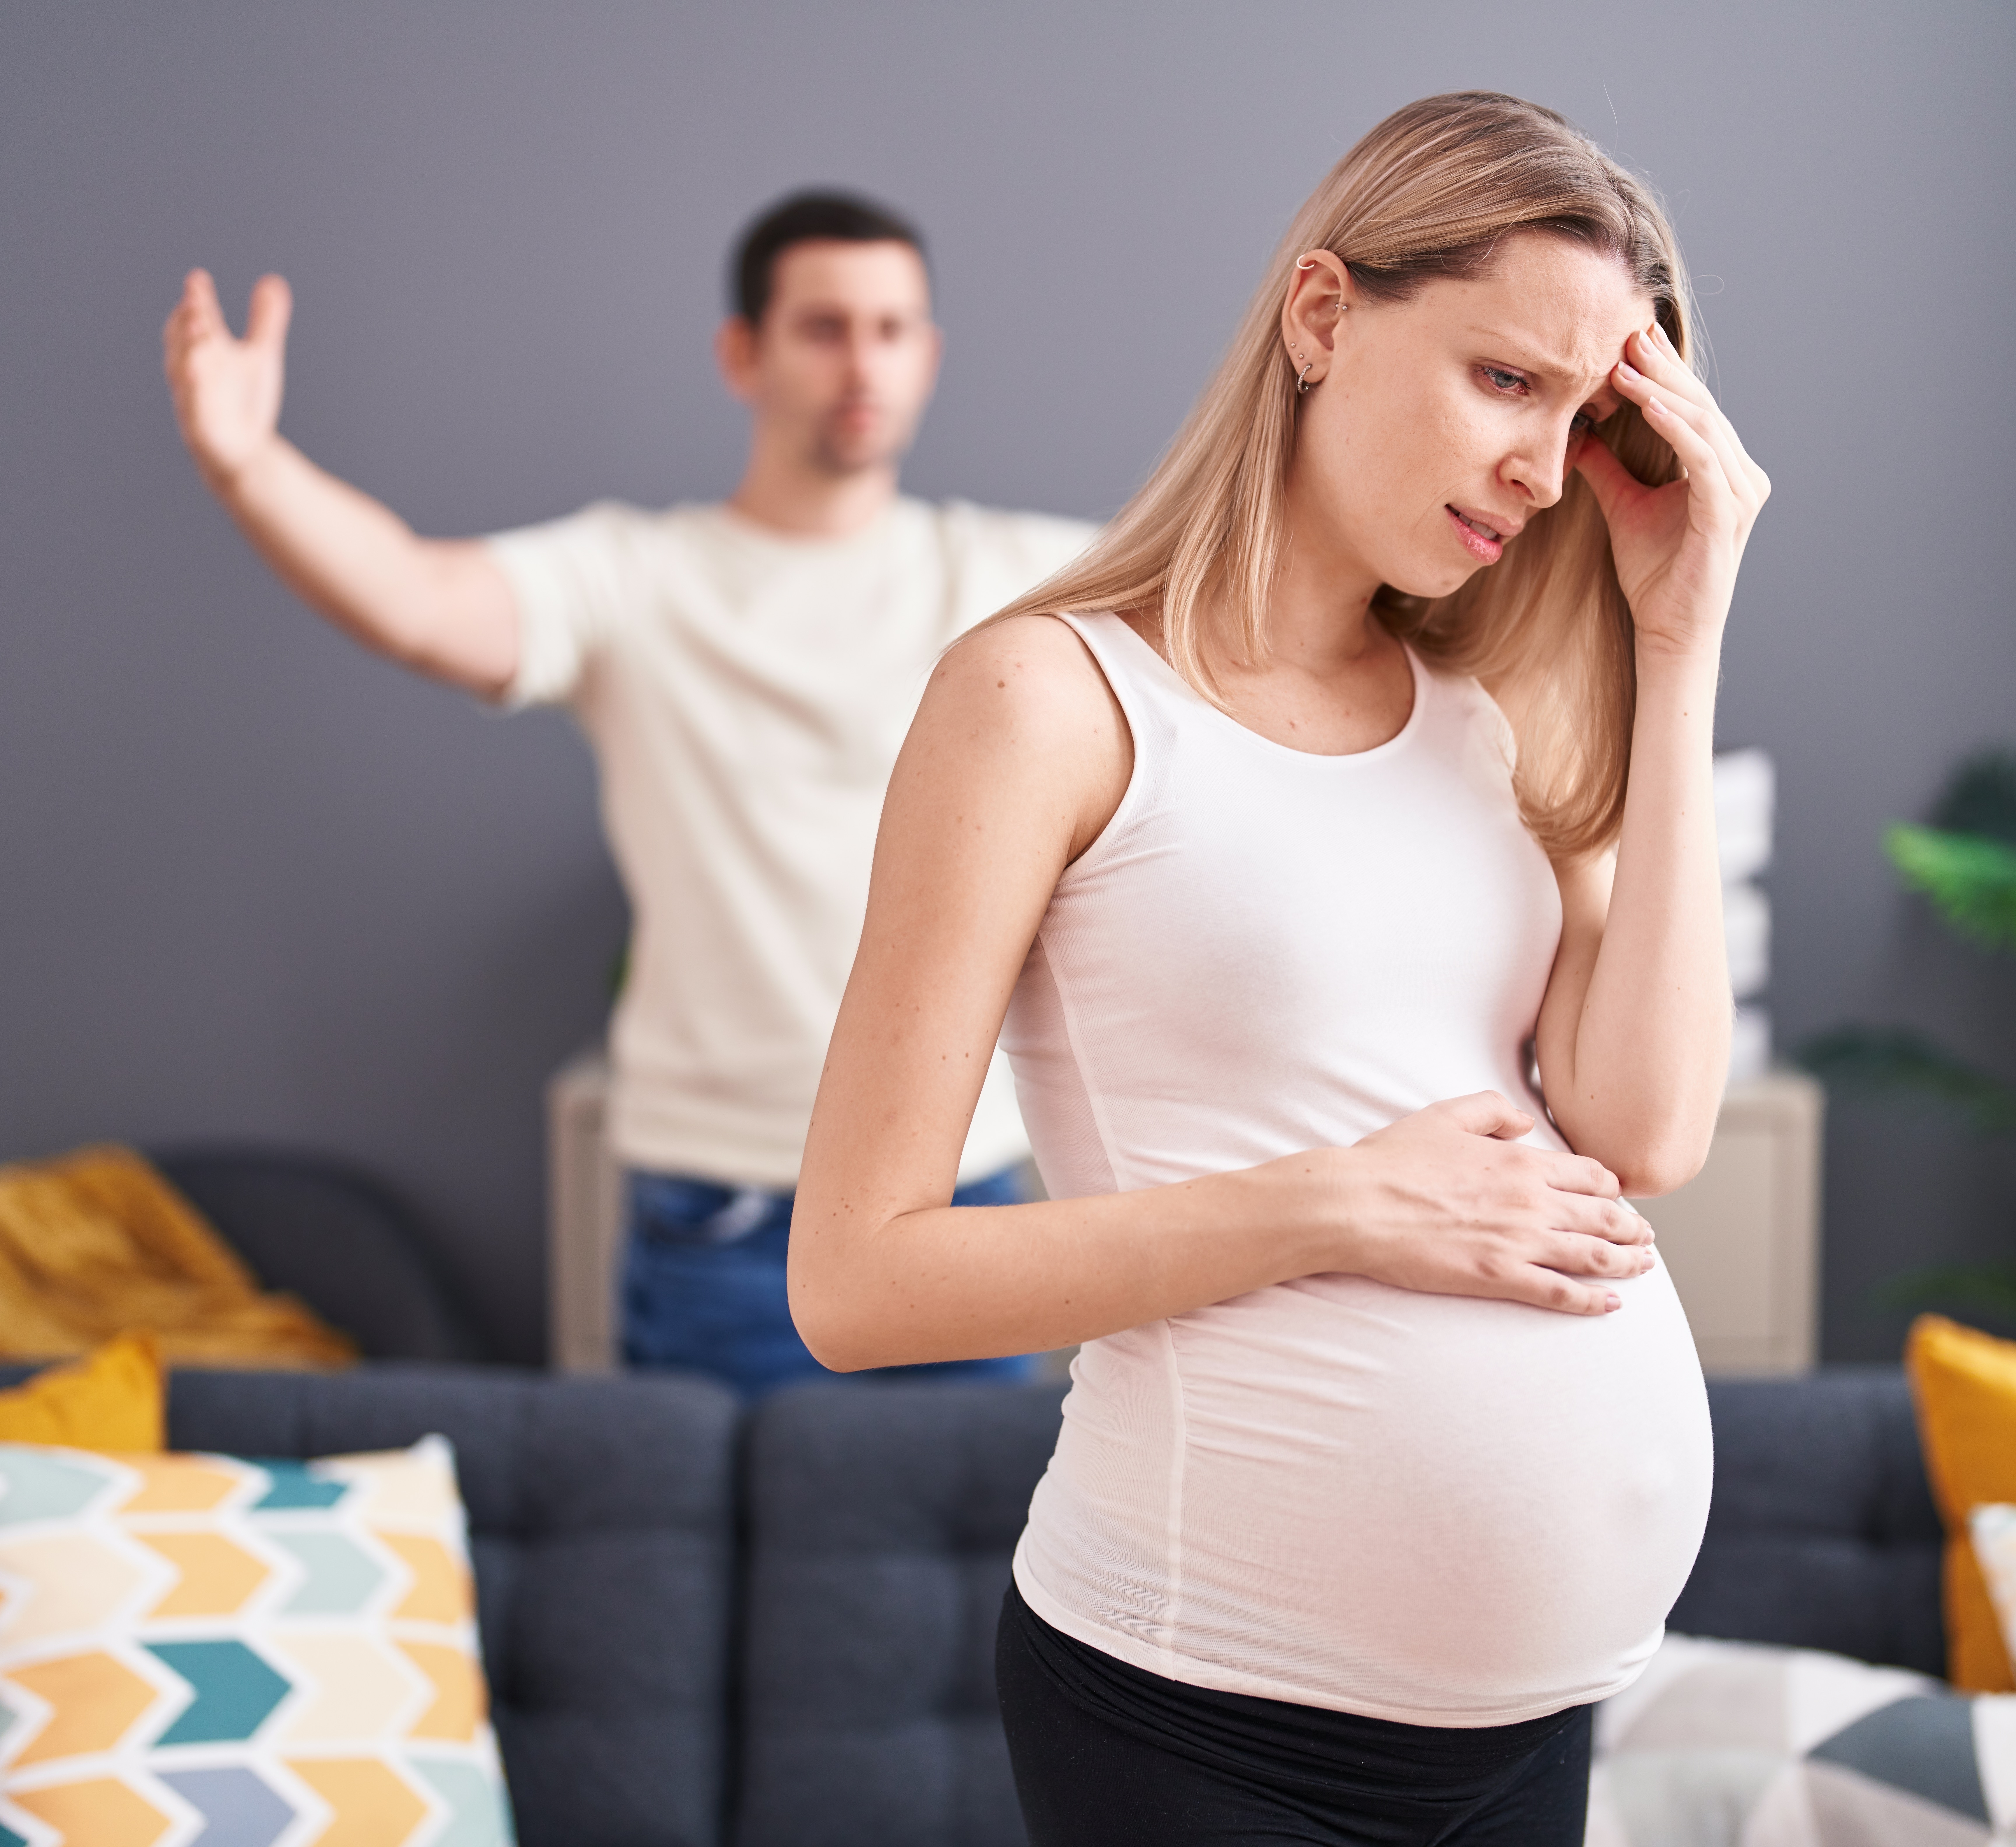 A man arguing with a pregnant woman | Source: Shutterstock